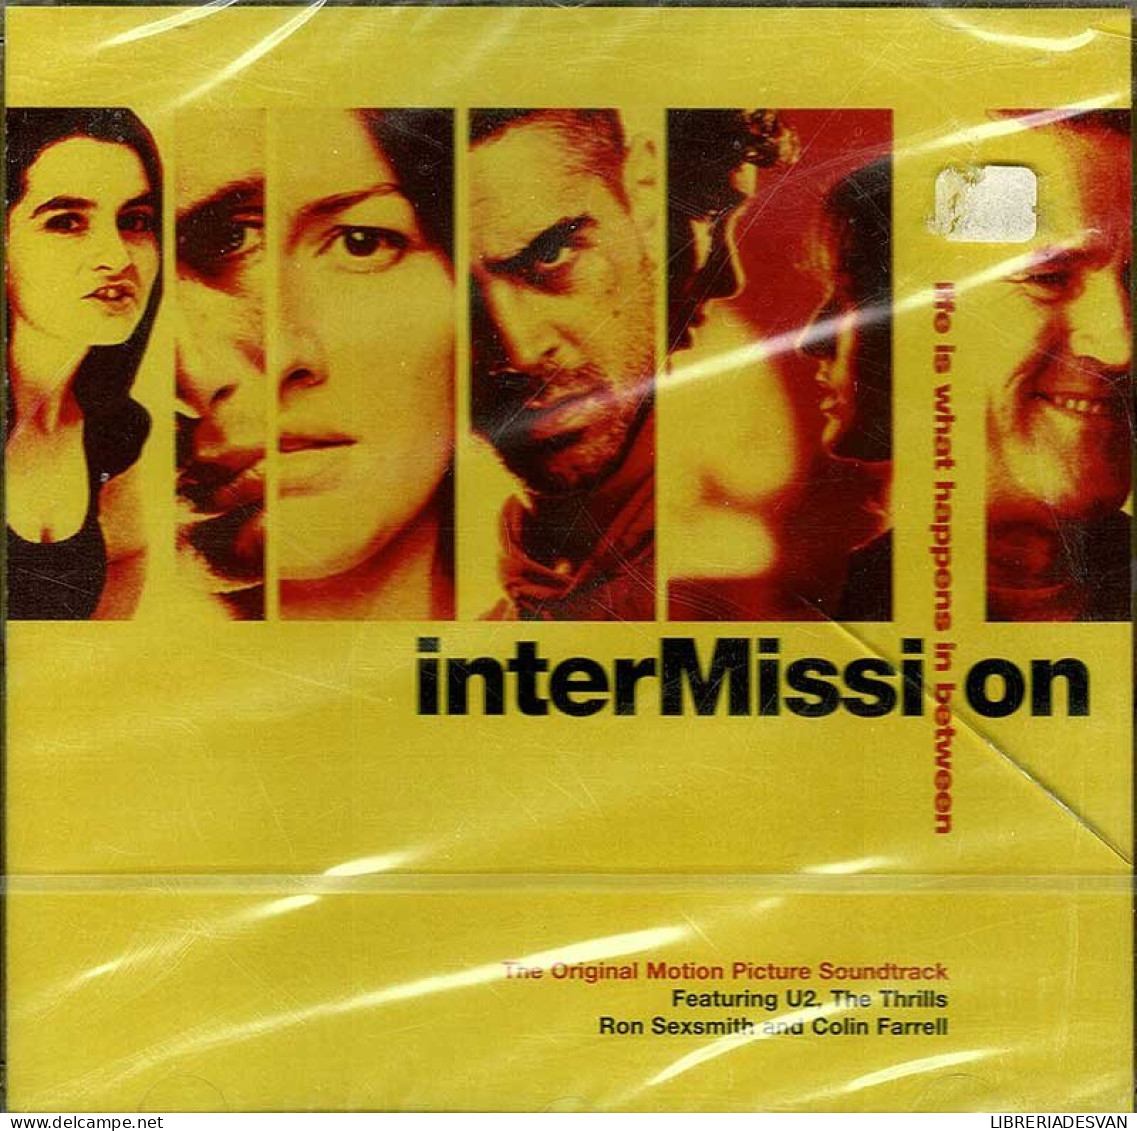 Intermission - Life Is What Happens In Between (The Original Motion Picture Soundtrack). CD - Filmmuziek